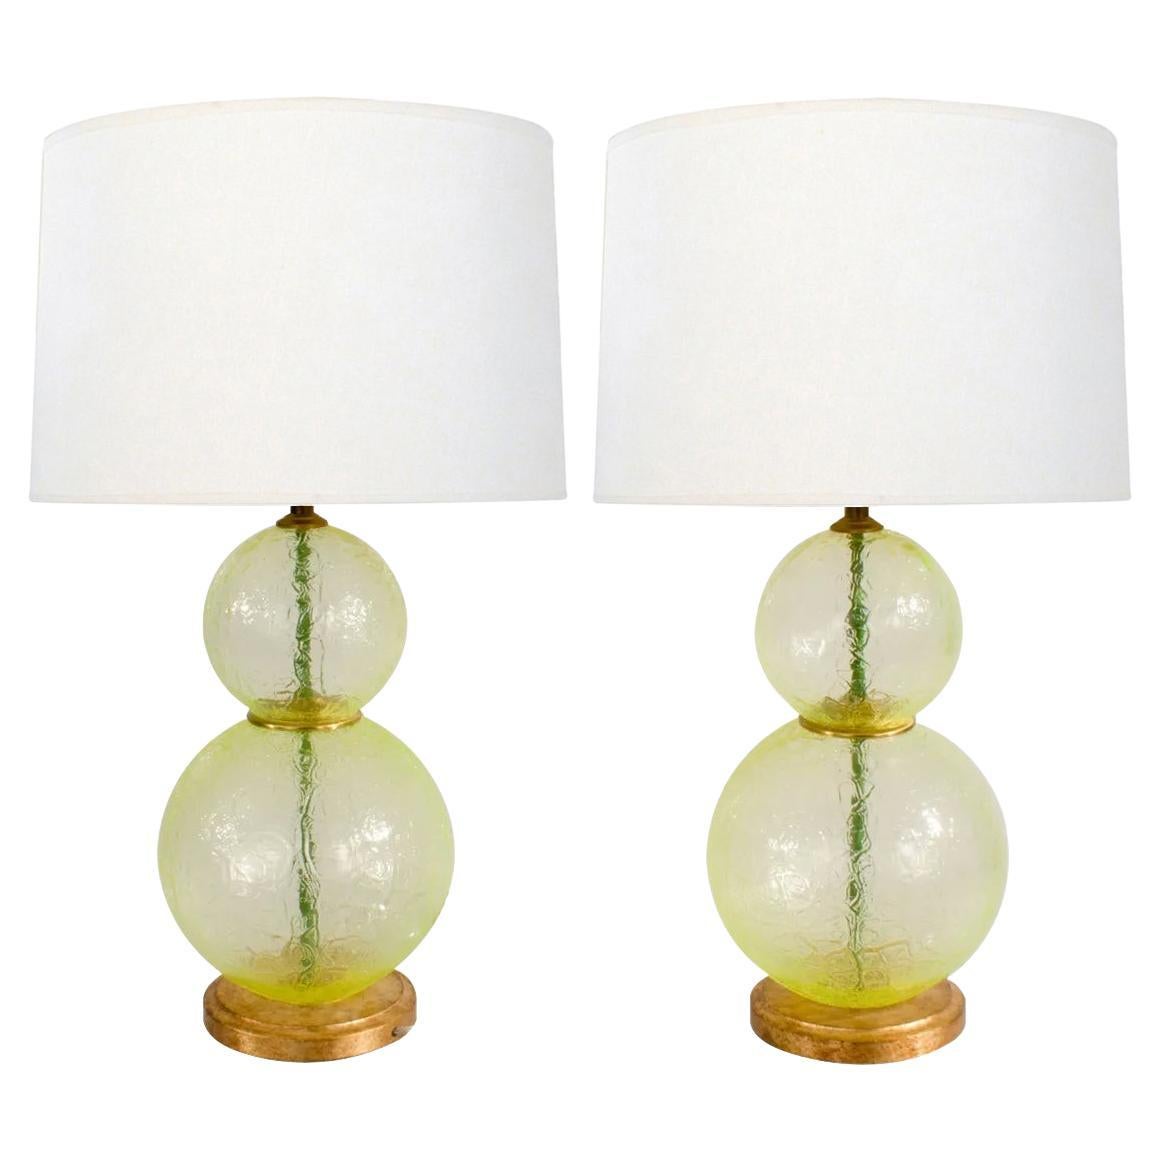 A Translucent & Textured Pair of Murano Stacked Chartreuse Glass Sphere Lamps 